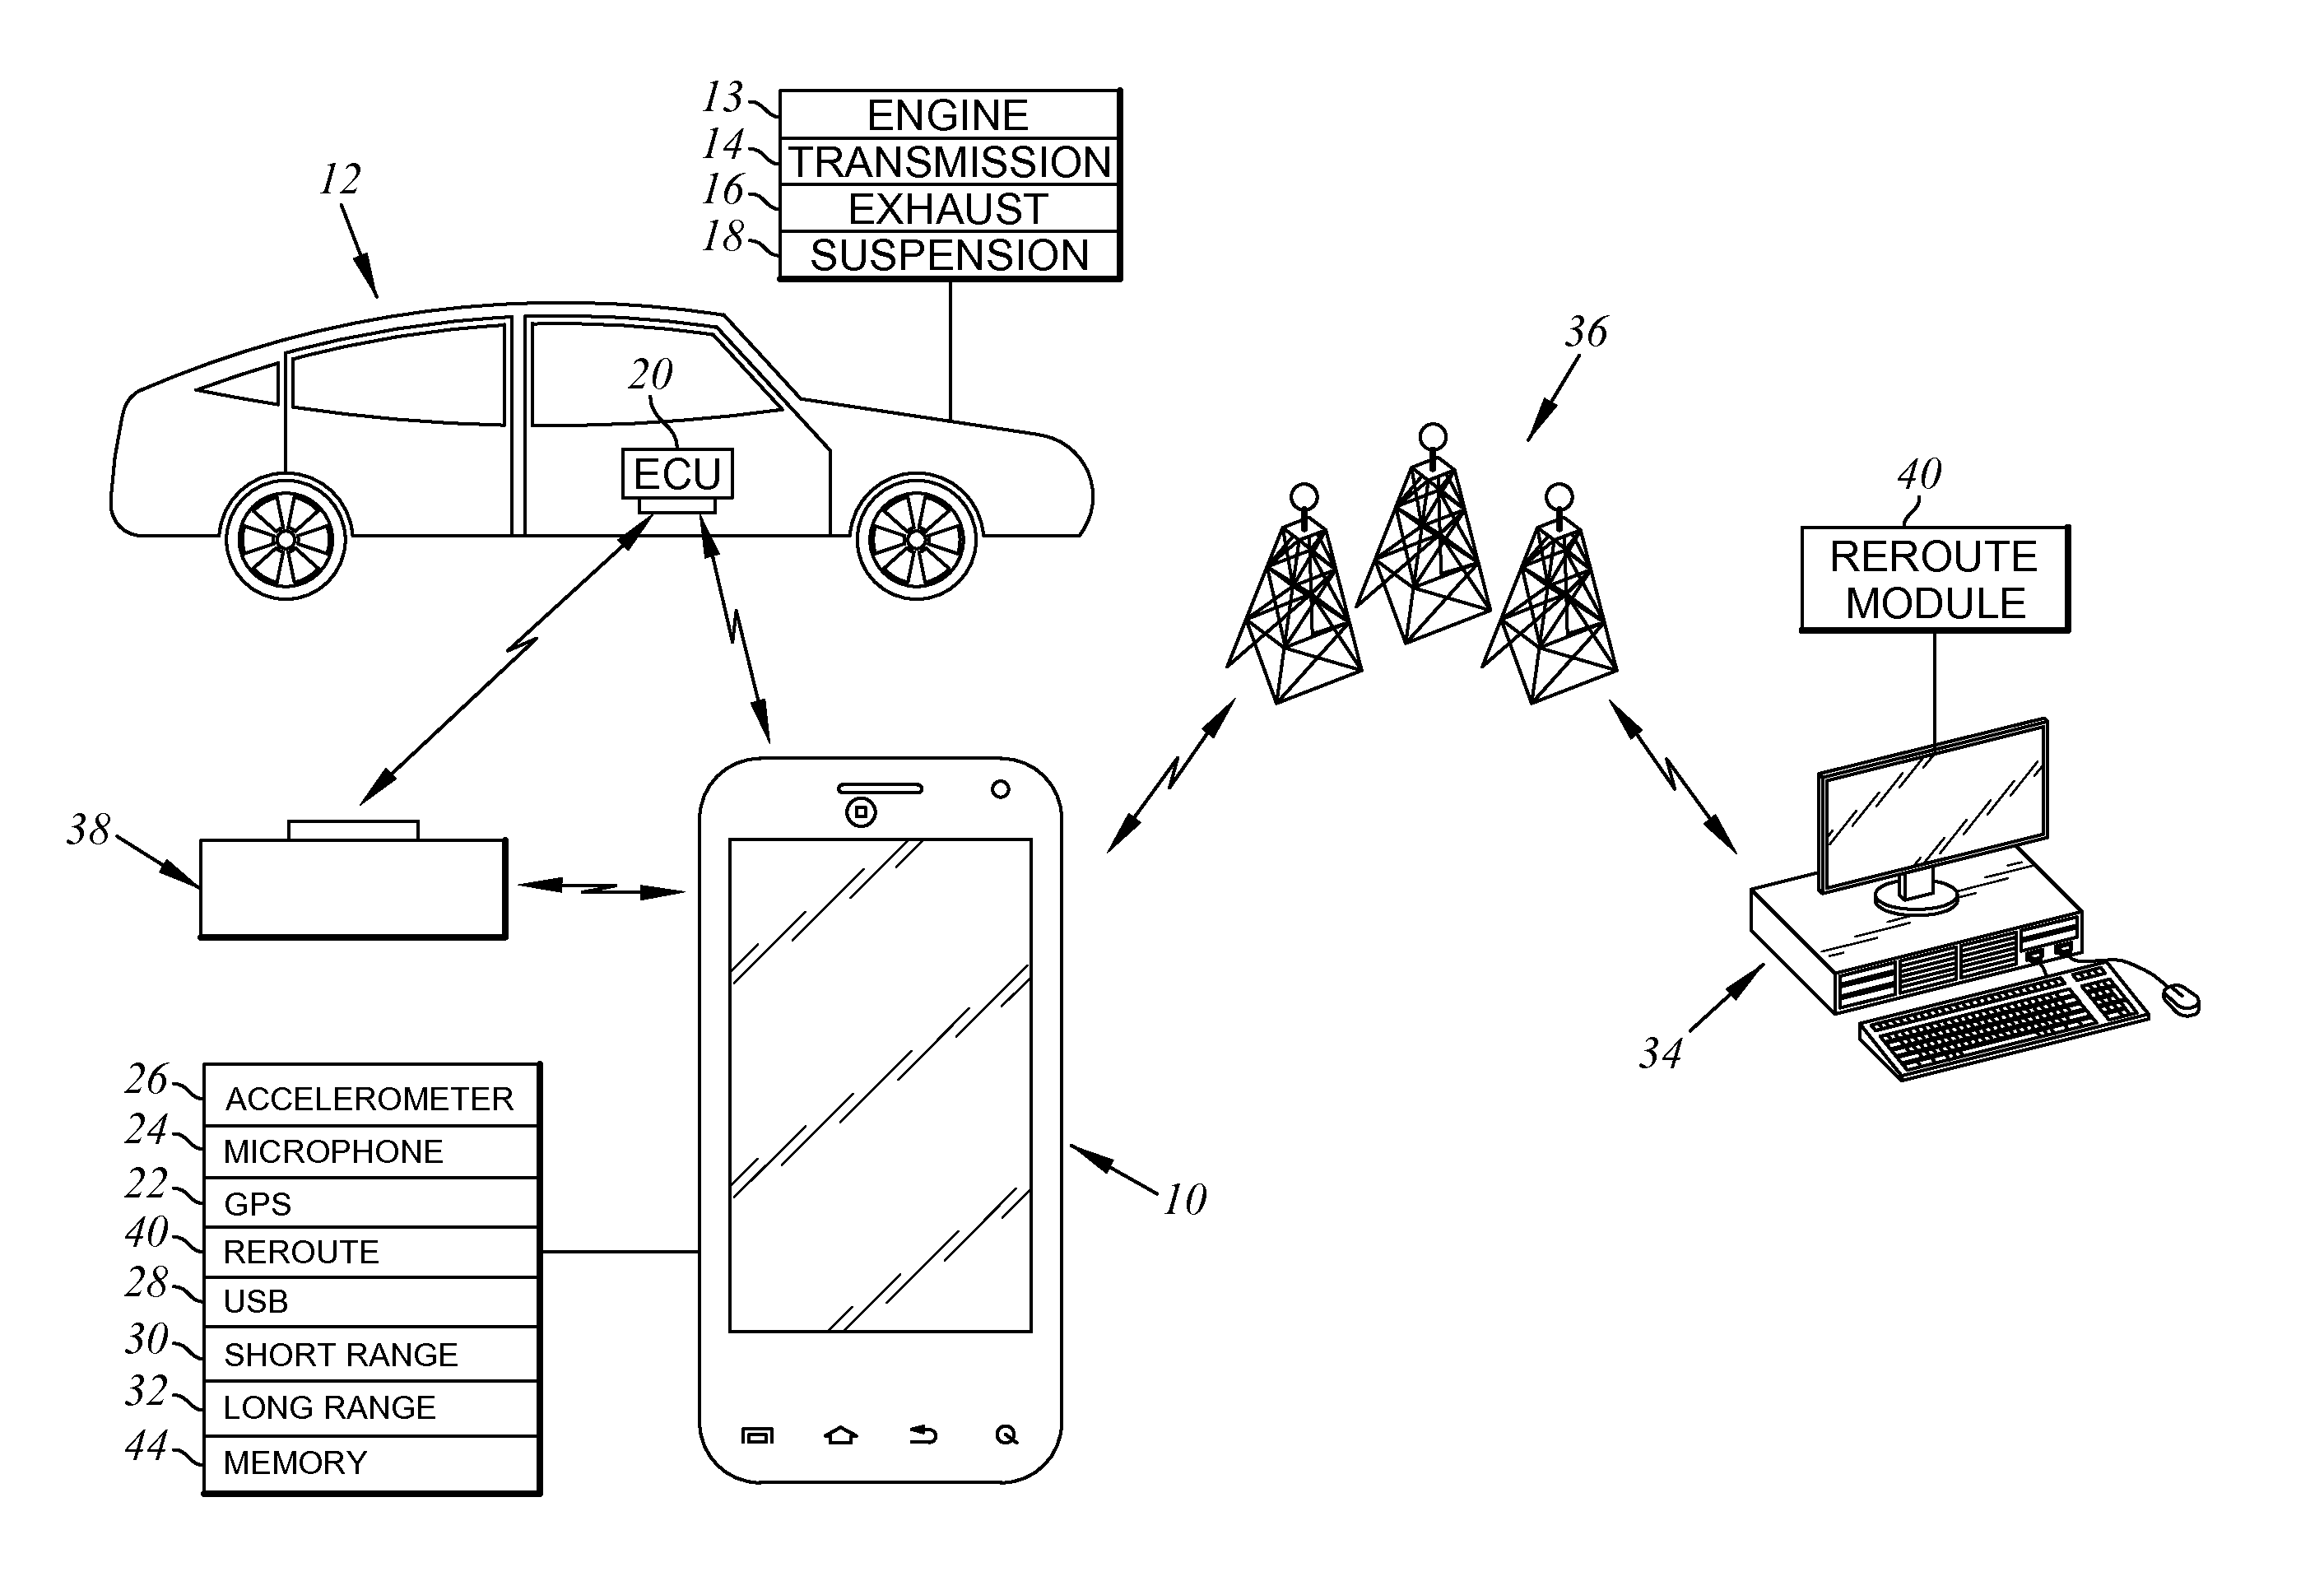 System for detecting the operational status of a vehicle using a handheld communication device